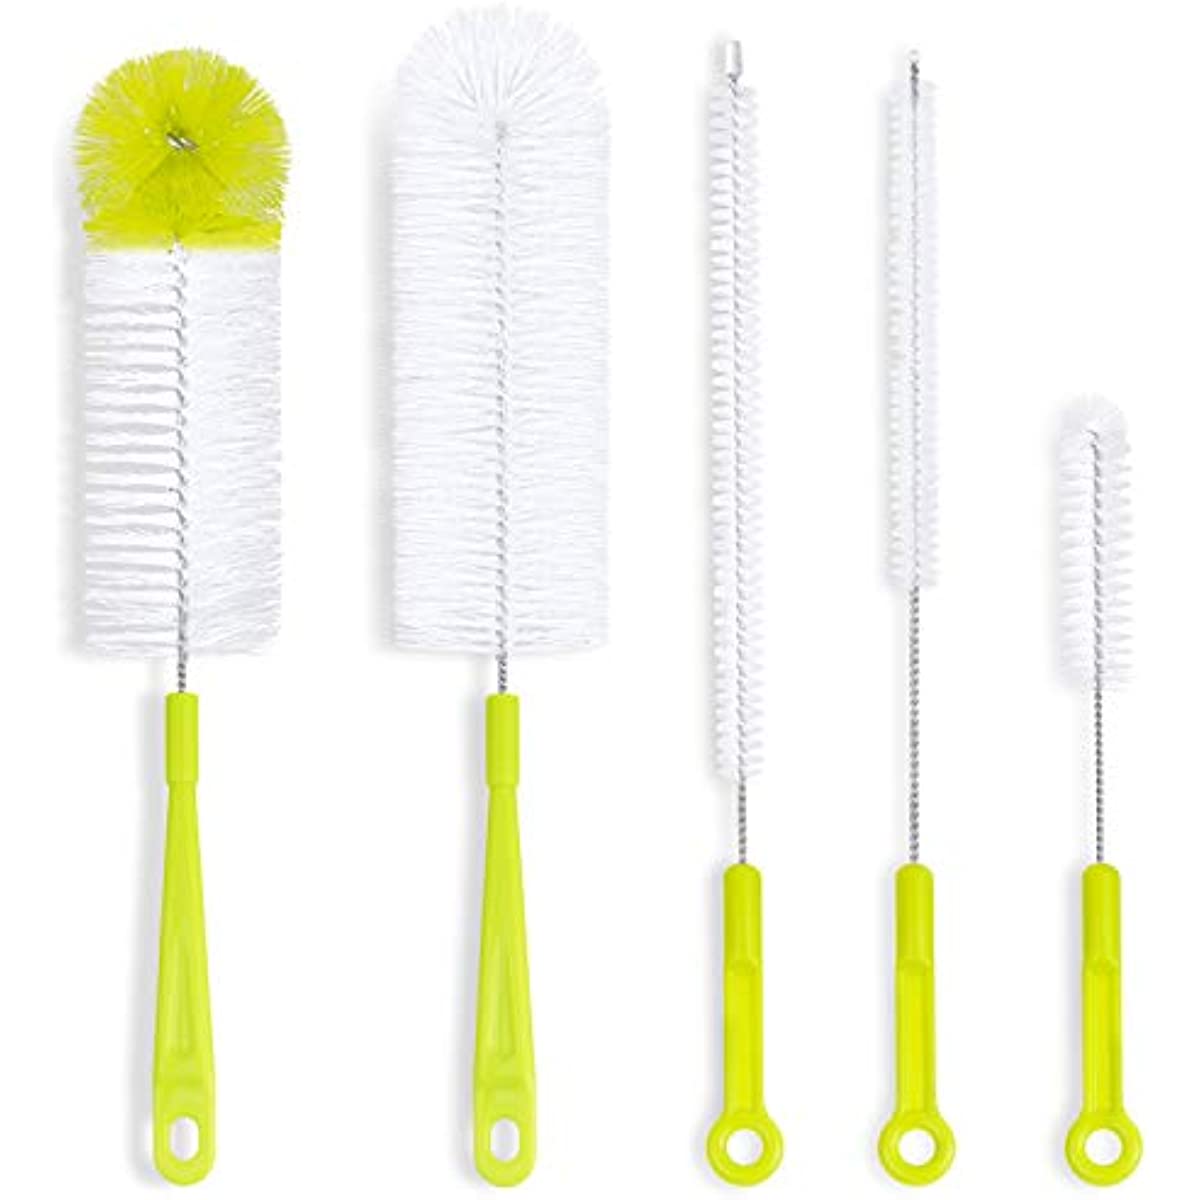 2 Pcs Drain Cleaner Brush 15 Inches Extra Long Handle Scrub Cleaner Bottle  Brush for Cleaning Drain Brush Household Cleaning Brushes for Tube